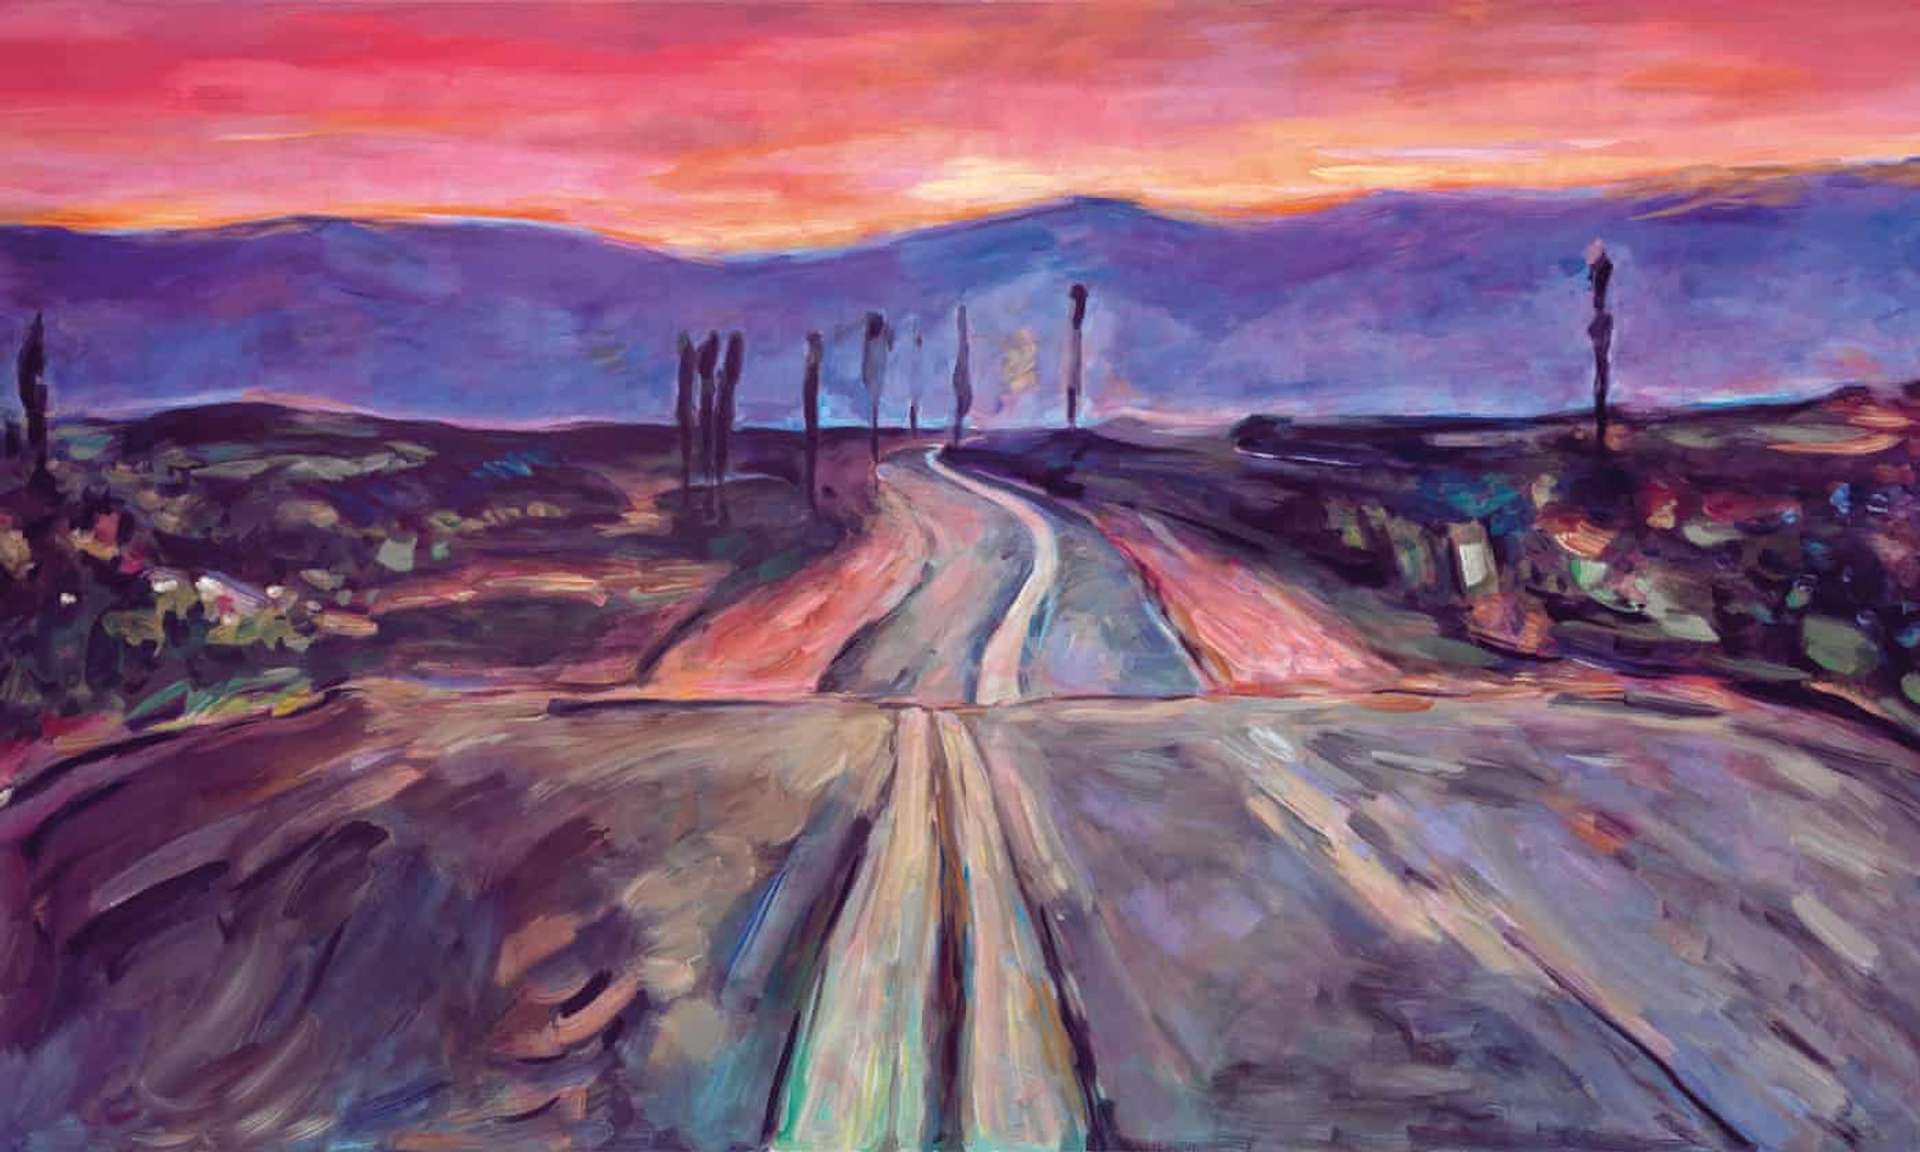 A sunset sky over mountains in the distance with an empty highway running through the centre with the desert on both sides and various telephone posts.